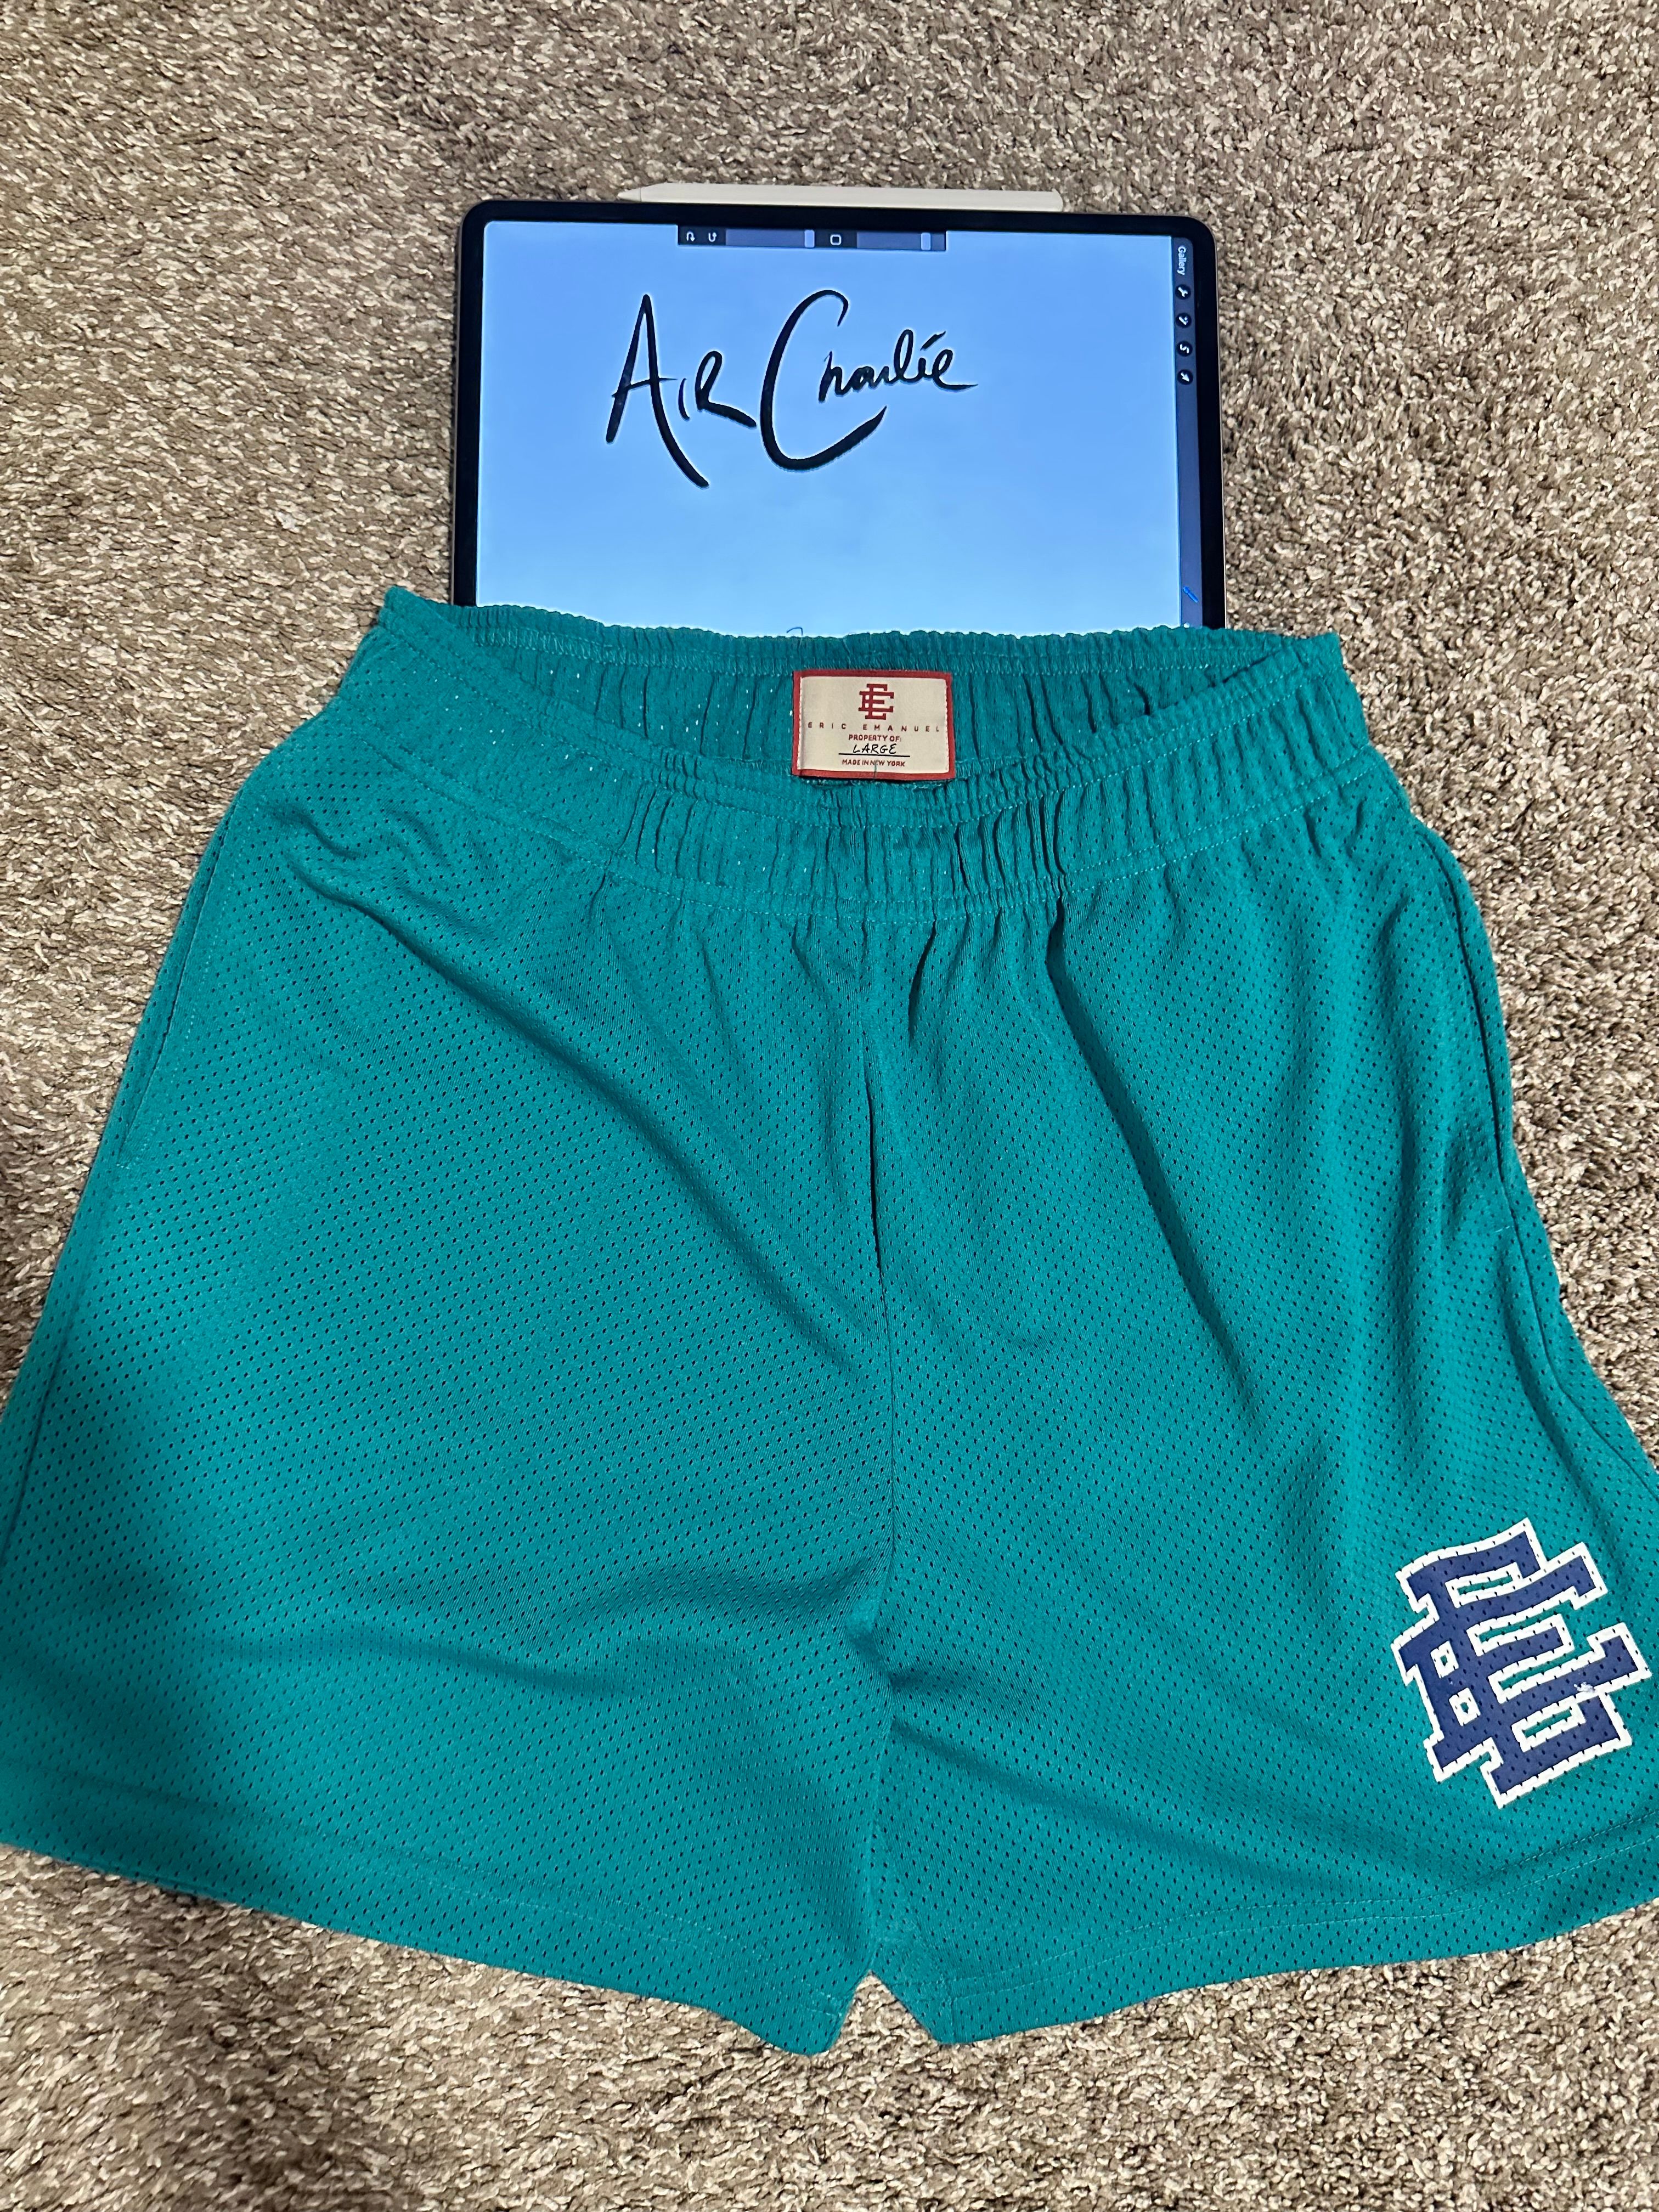 Pre-owned Eric Emanuel 100% Authentic Ee  Shorts Size Large In Teal